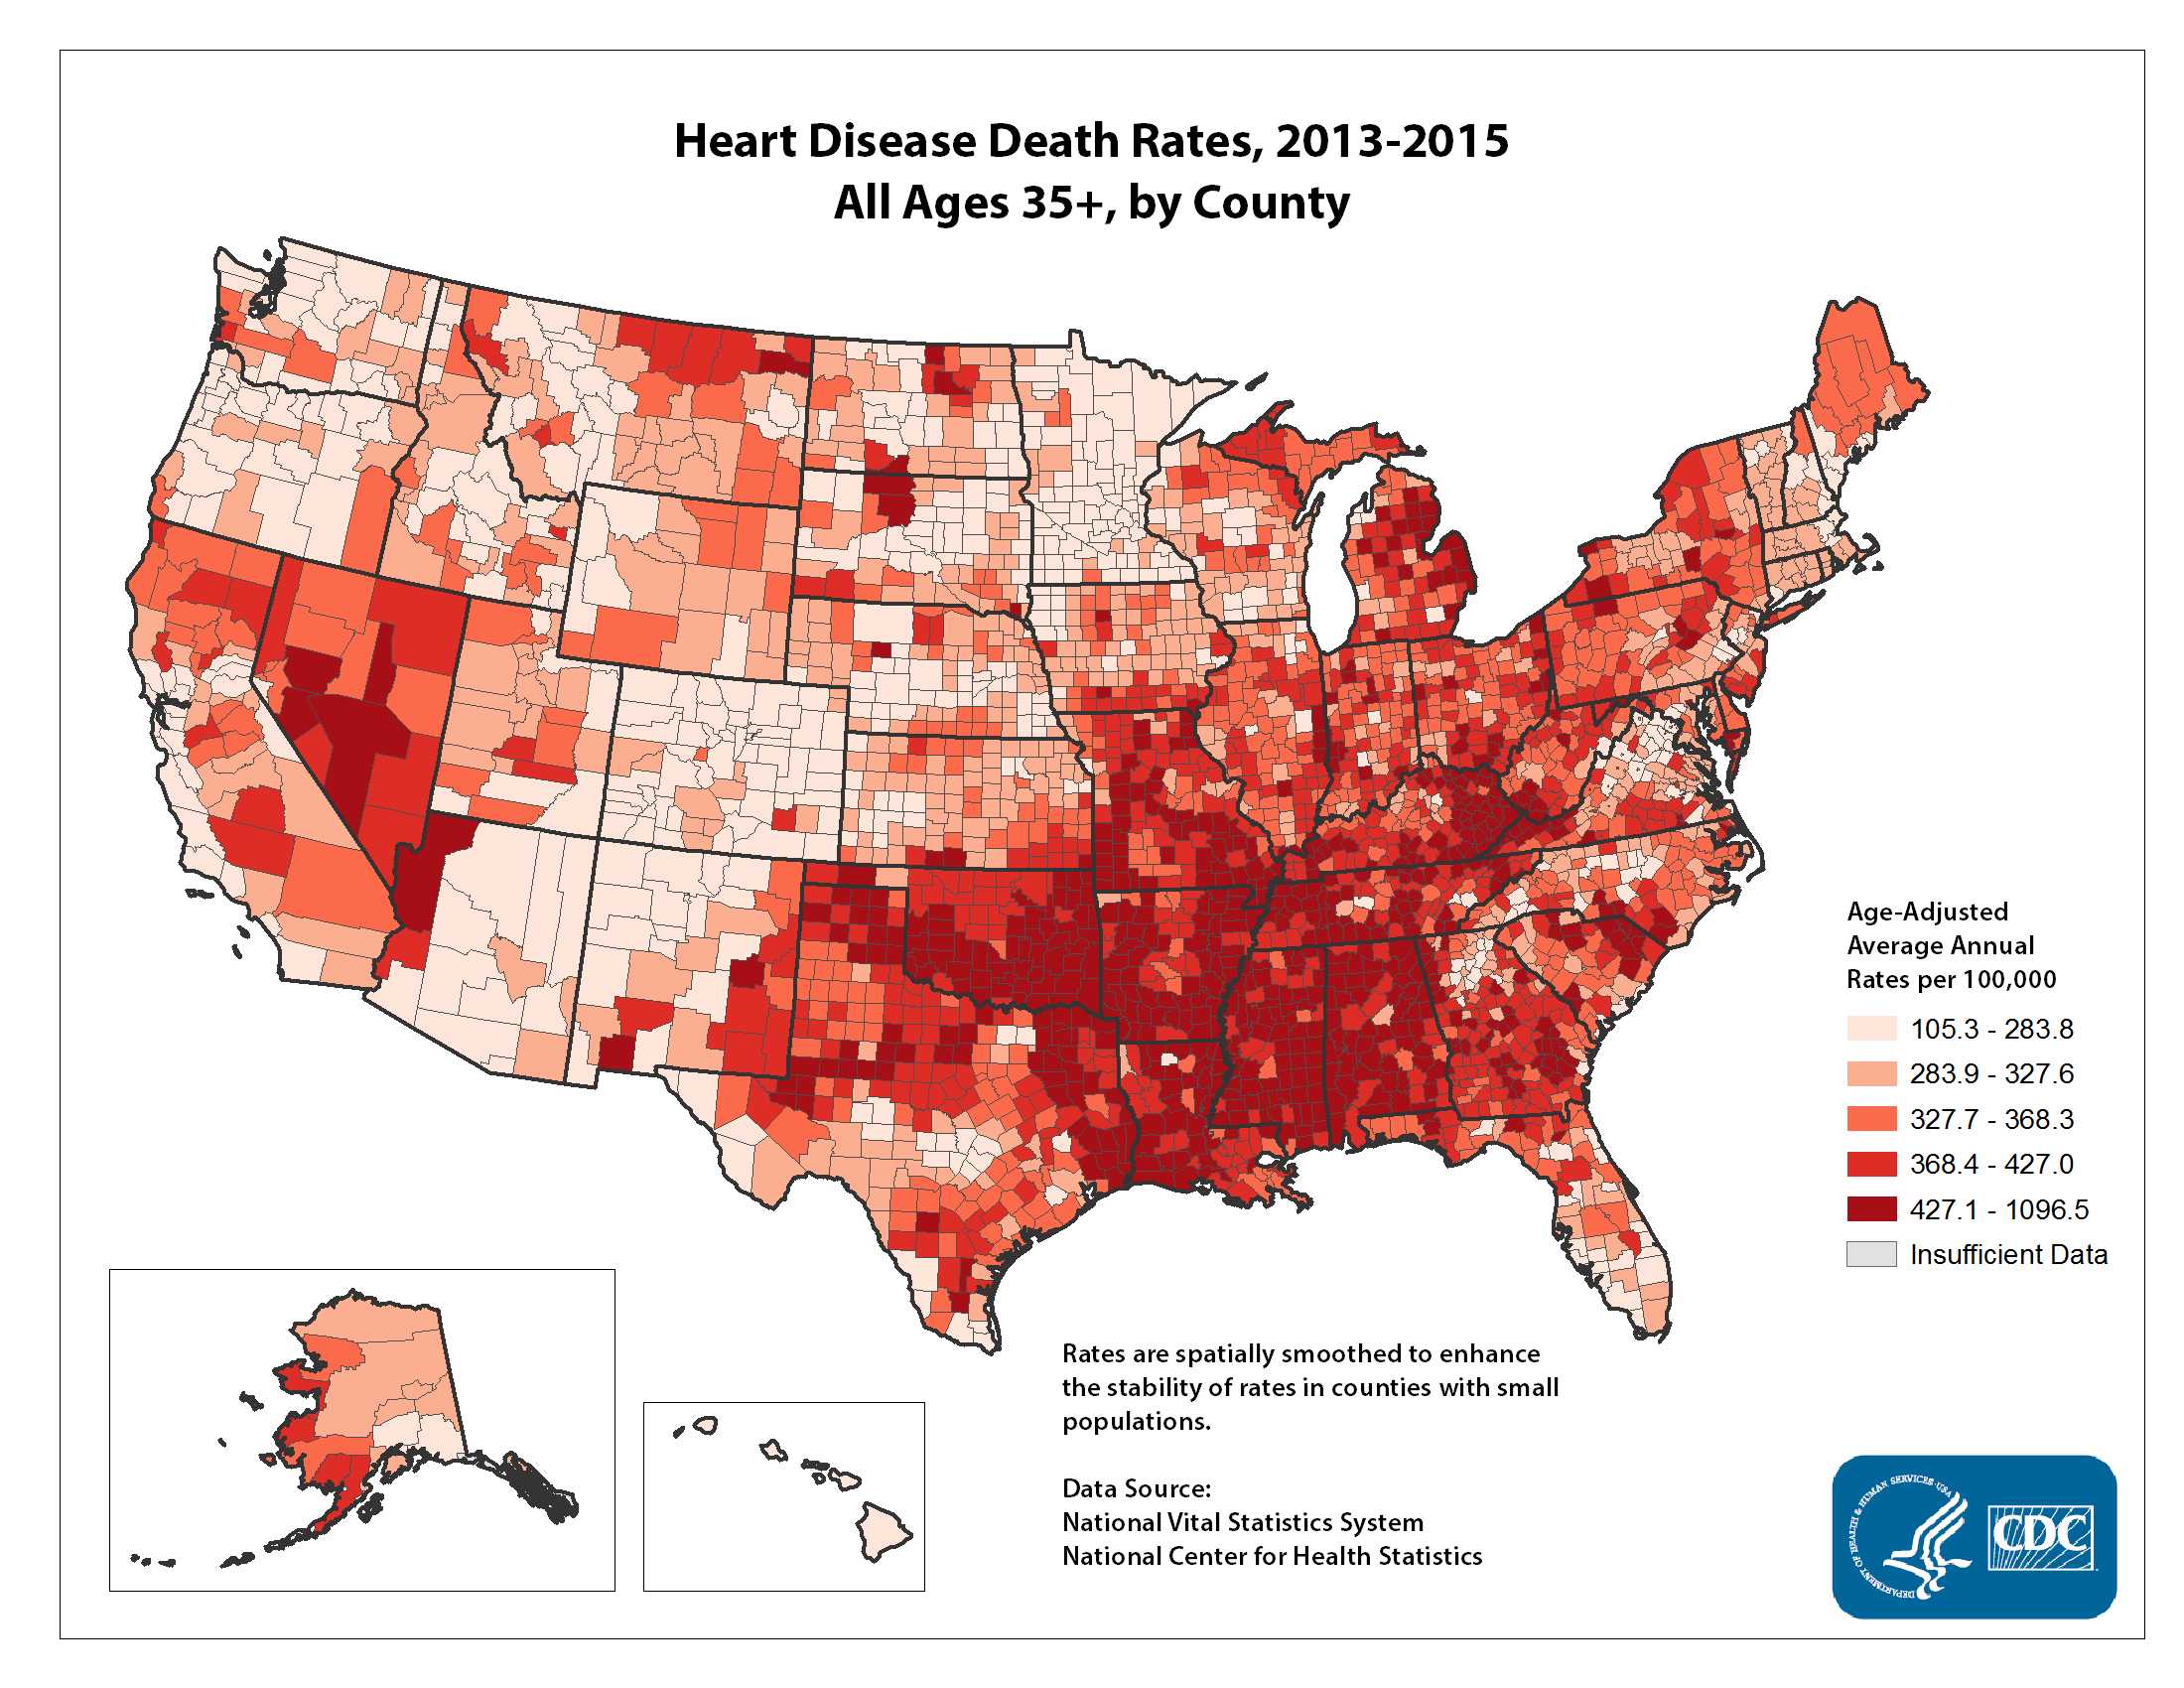 Heart Disease Death Rates for 2011 through 2013 for Adults Aged 35 Years and Older by County. The map shows that concentrations of counties with the highest heart disease death rates - meaning the top quintile - are located primarily in Mississippi, Oklahoma, Louisiana, Arkansas, and Alabama.  Pockets of high-rate counties also were found in Georgia, Kentucky, Tennessee, Missouri, and Nevada.